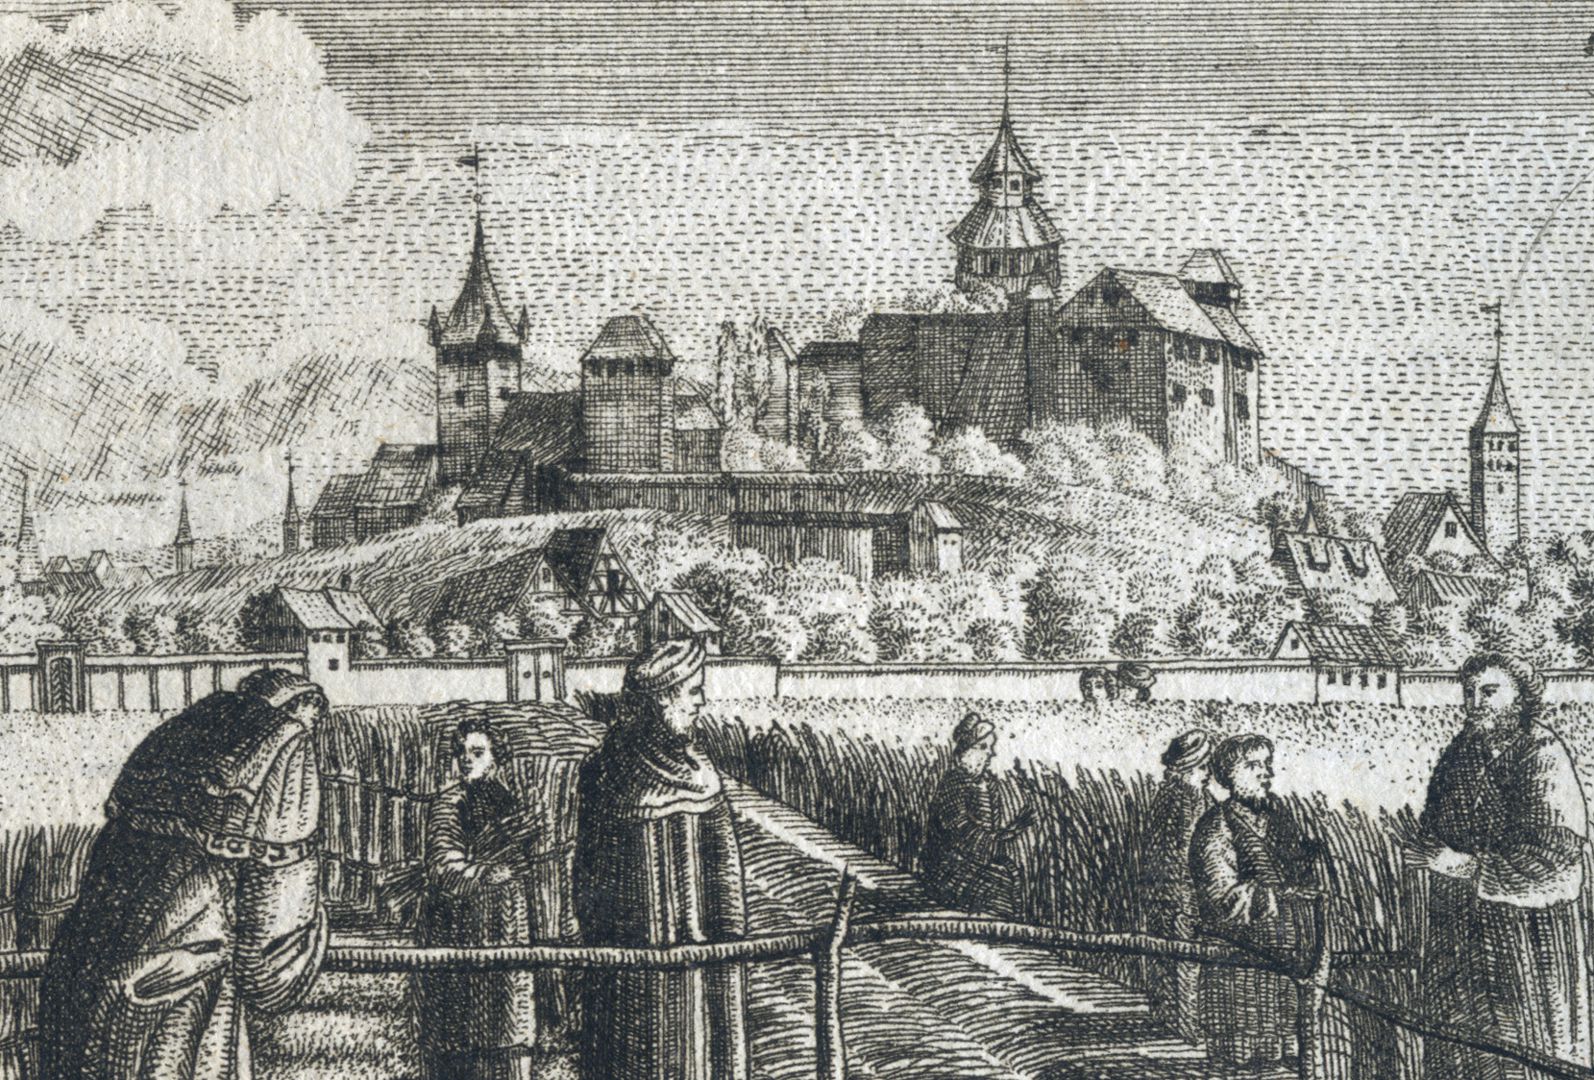 Prospect of the Johannes Felder near Nuremberg. Detail with the Nuemberg castle in the background